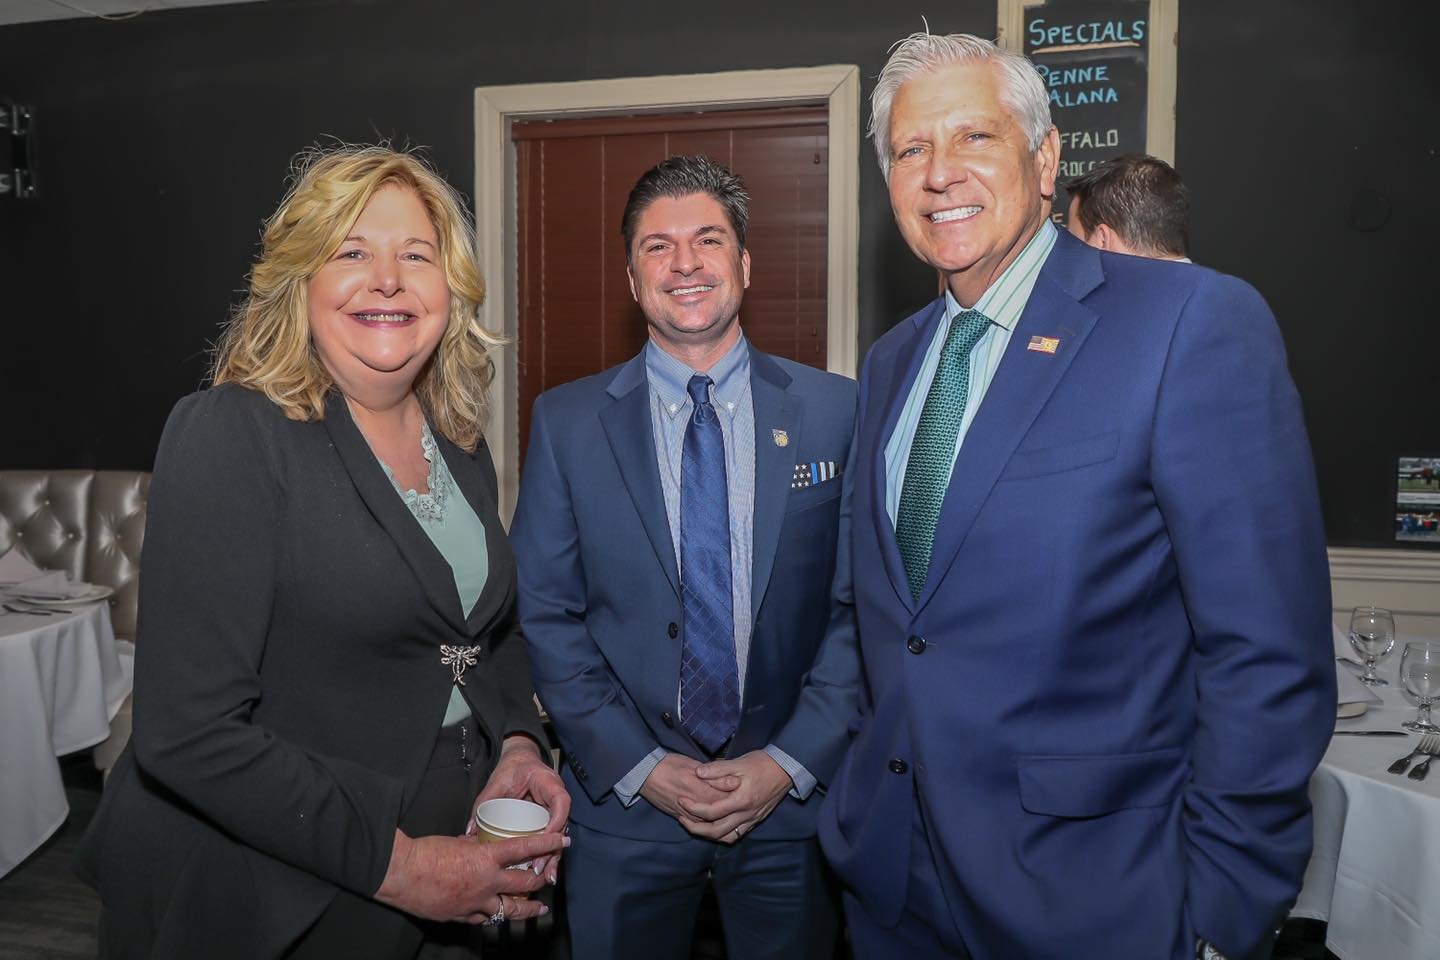 Nassau County District Attorney Anne Donnelly during a February event with County Police Benevolent Association President Tom Shevlin and County Executive Bruce Blakeman.